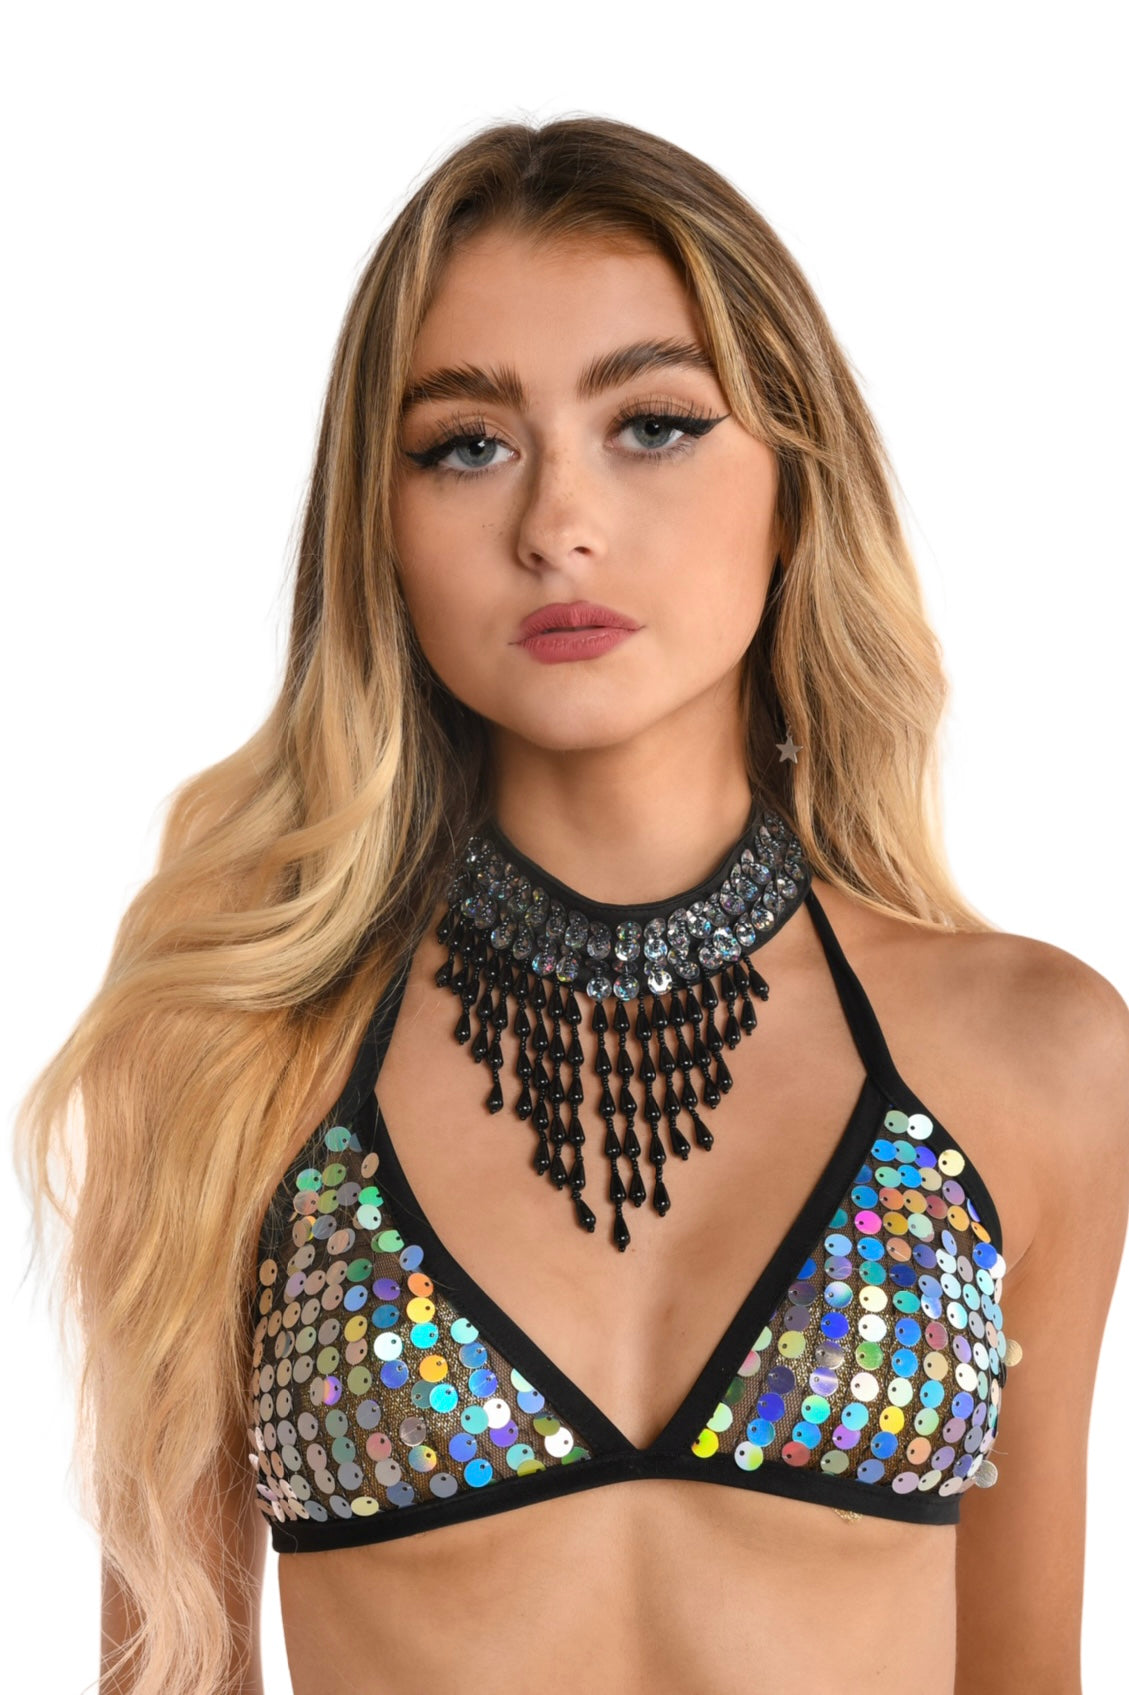 Hand Stitched Sequin Choker/Necklace - Disco Barbie